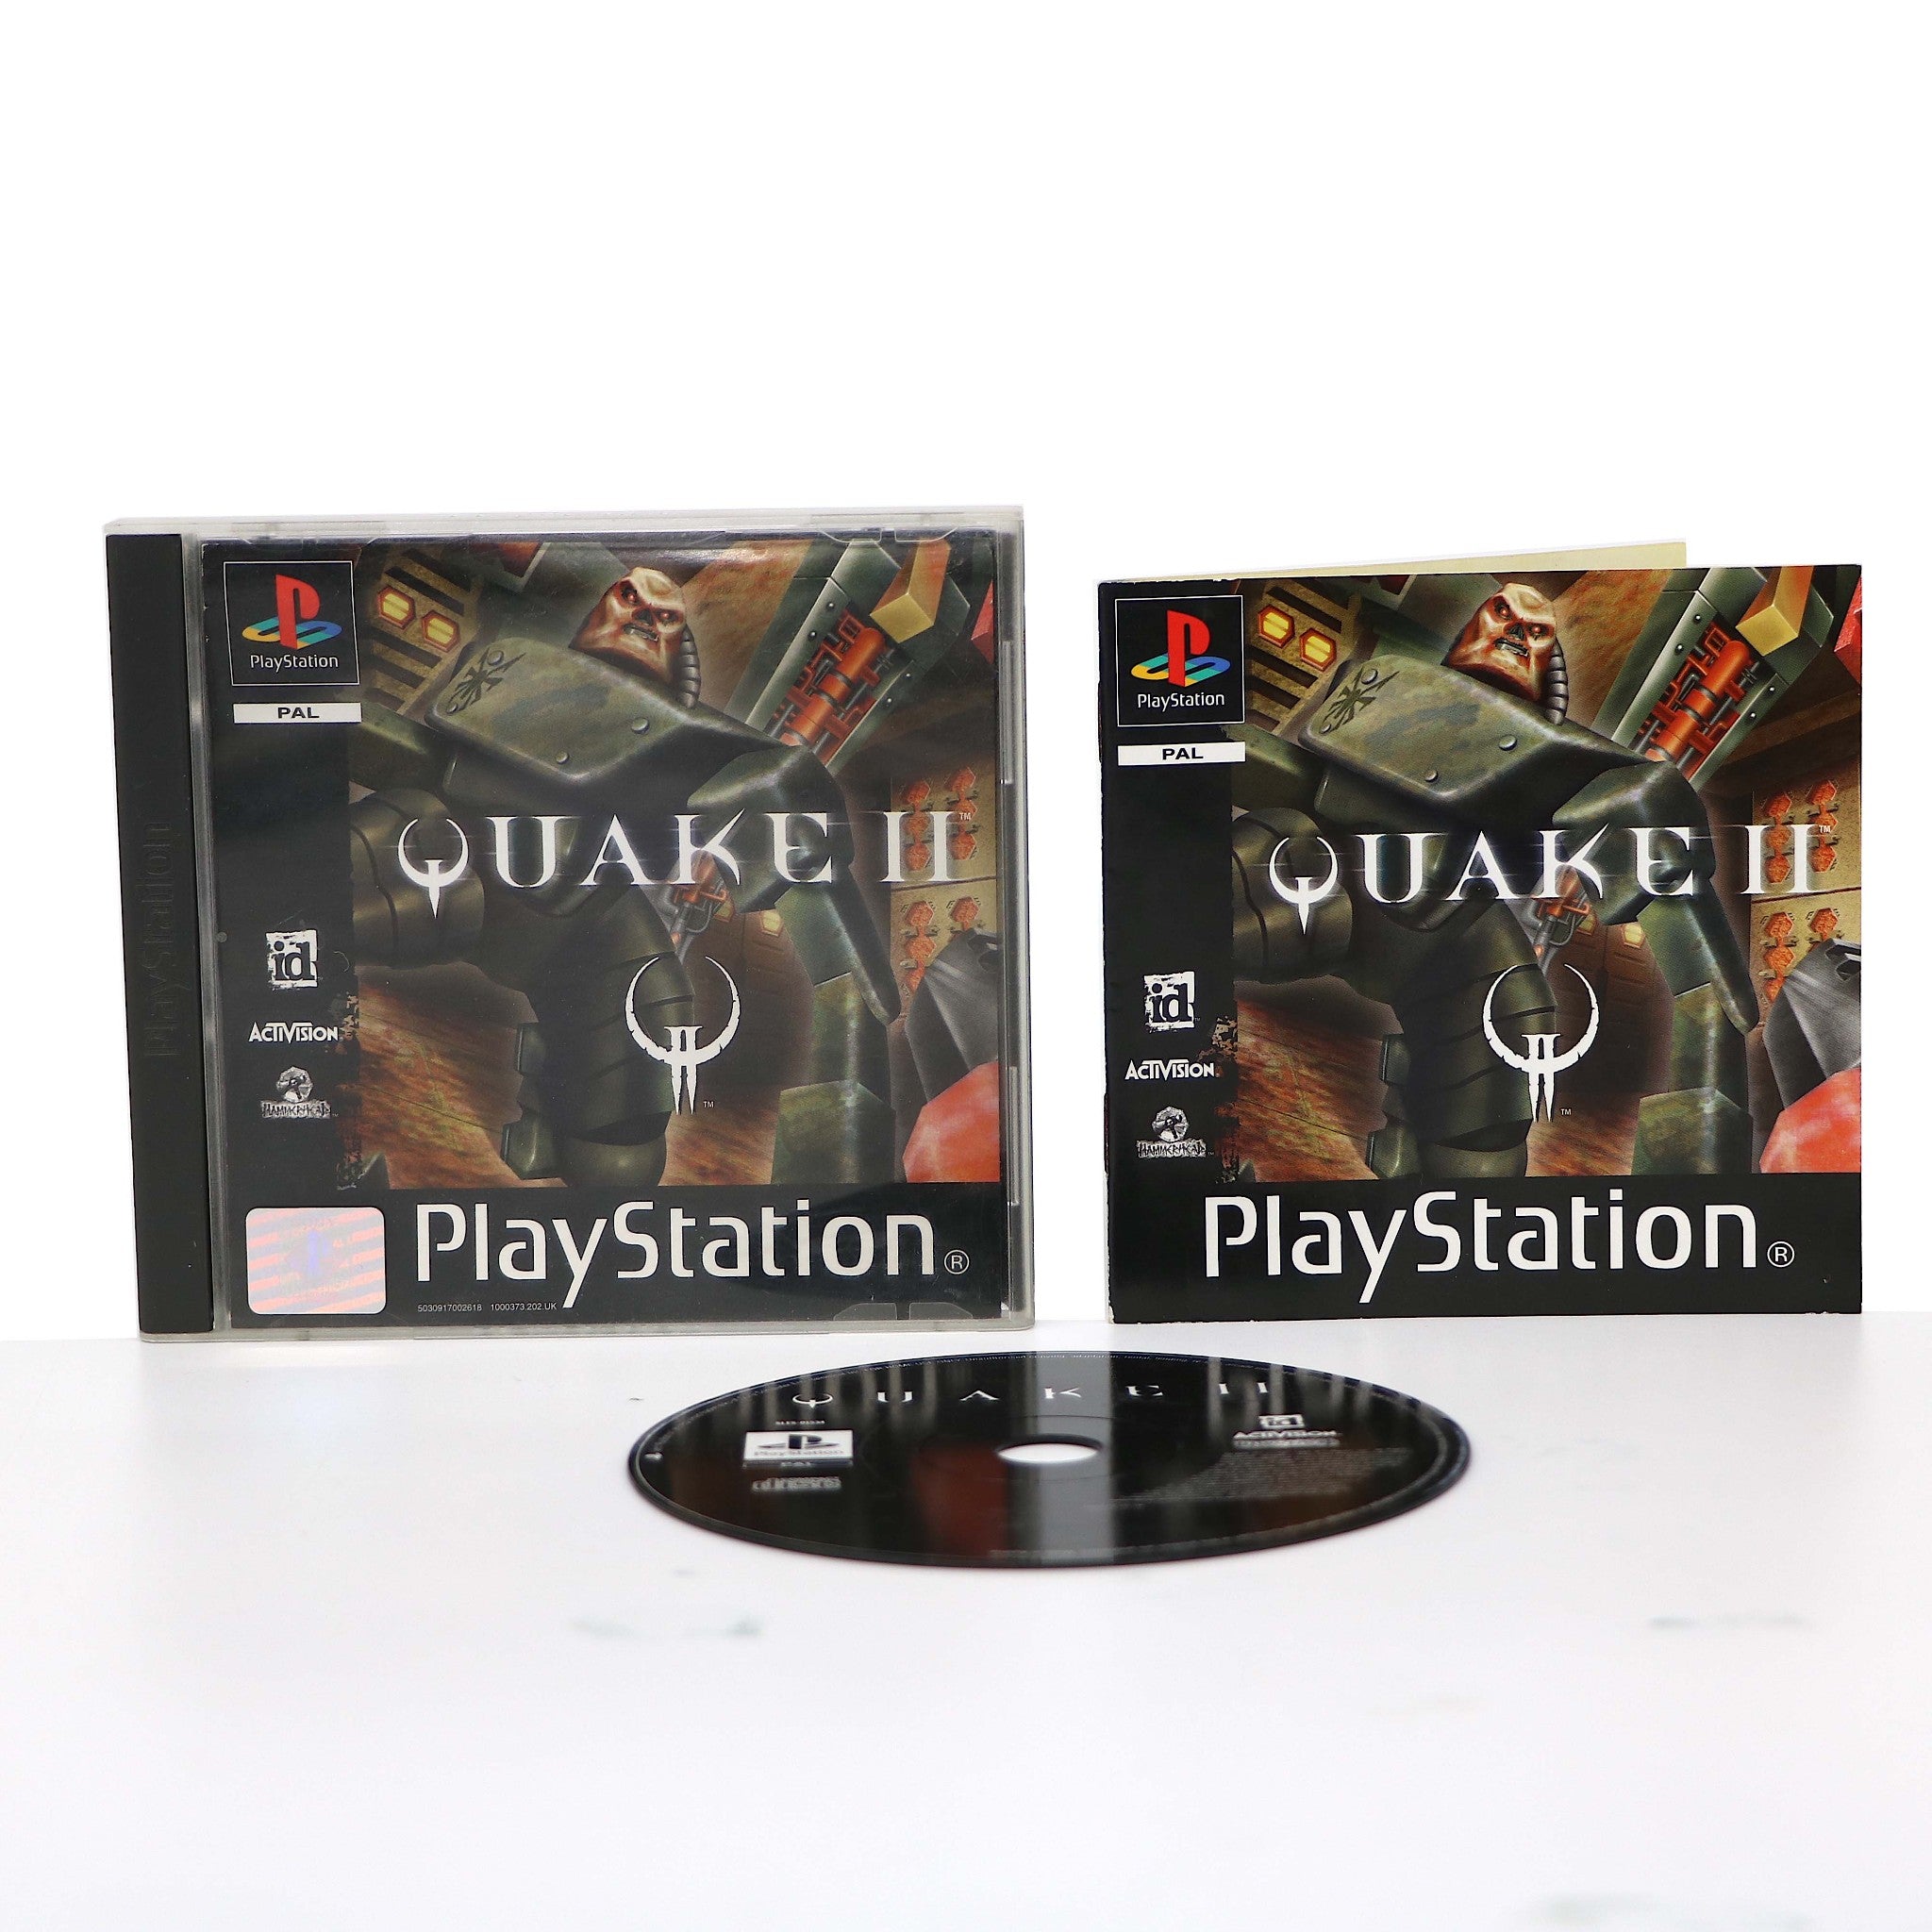 Quake II (2) | Sony Playstation PSONE PS1 Game | Collectable Condition!